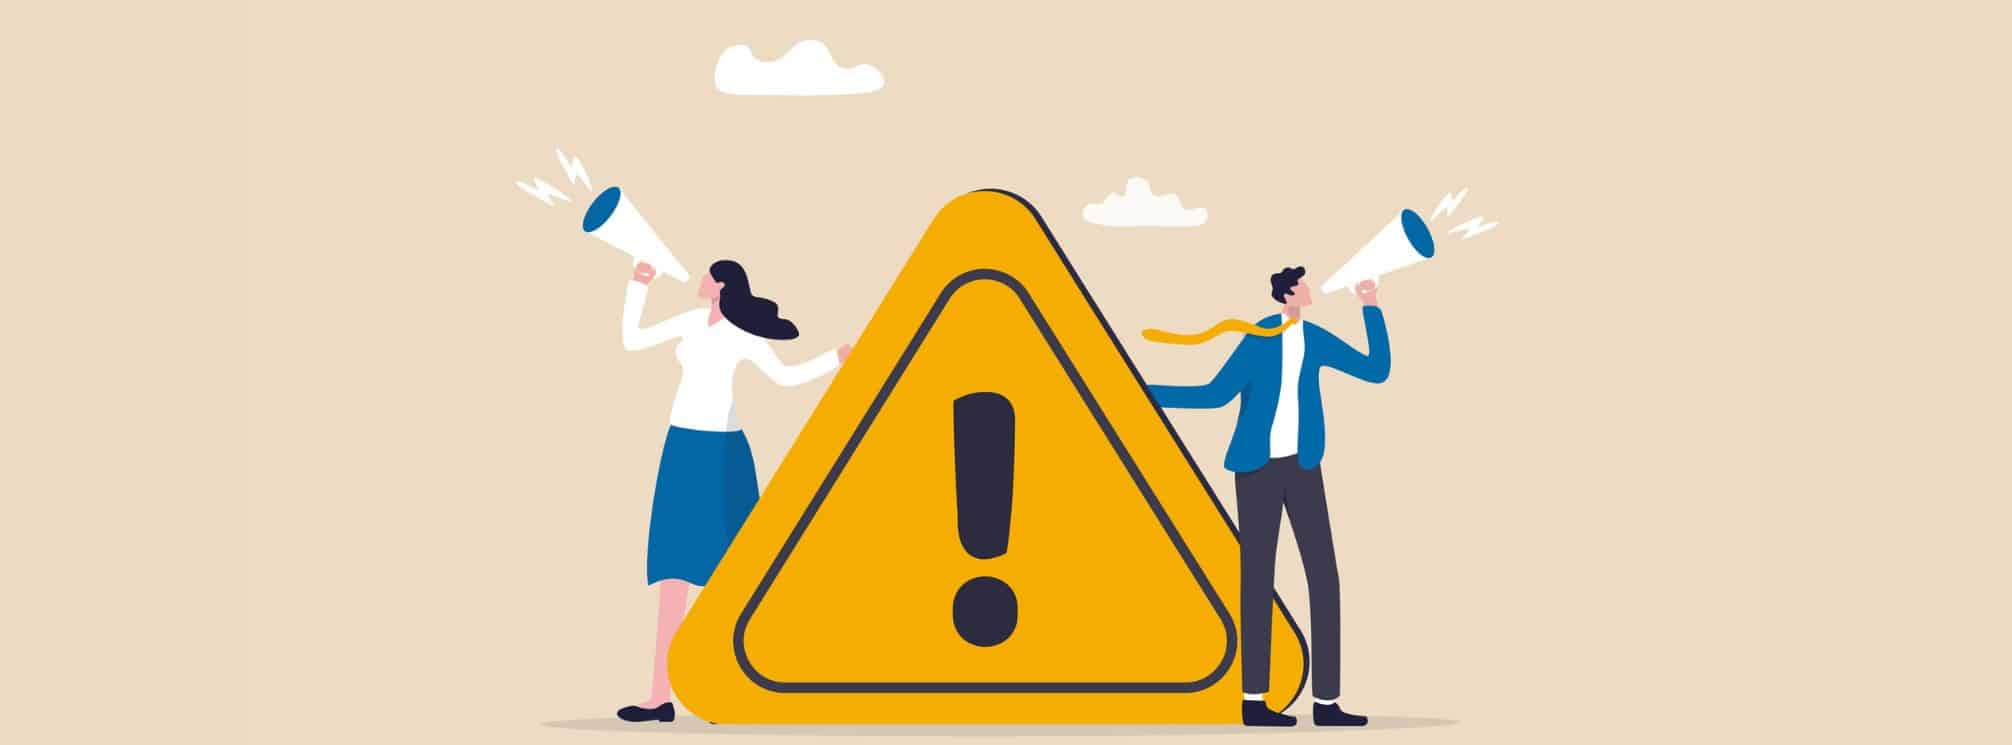 illustration of two people speaking into megaphones with a big caution sign between them